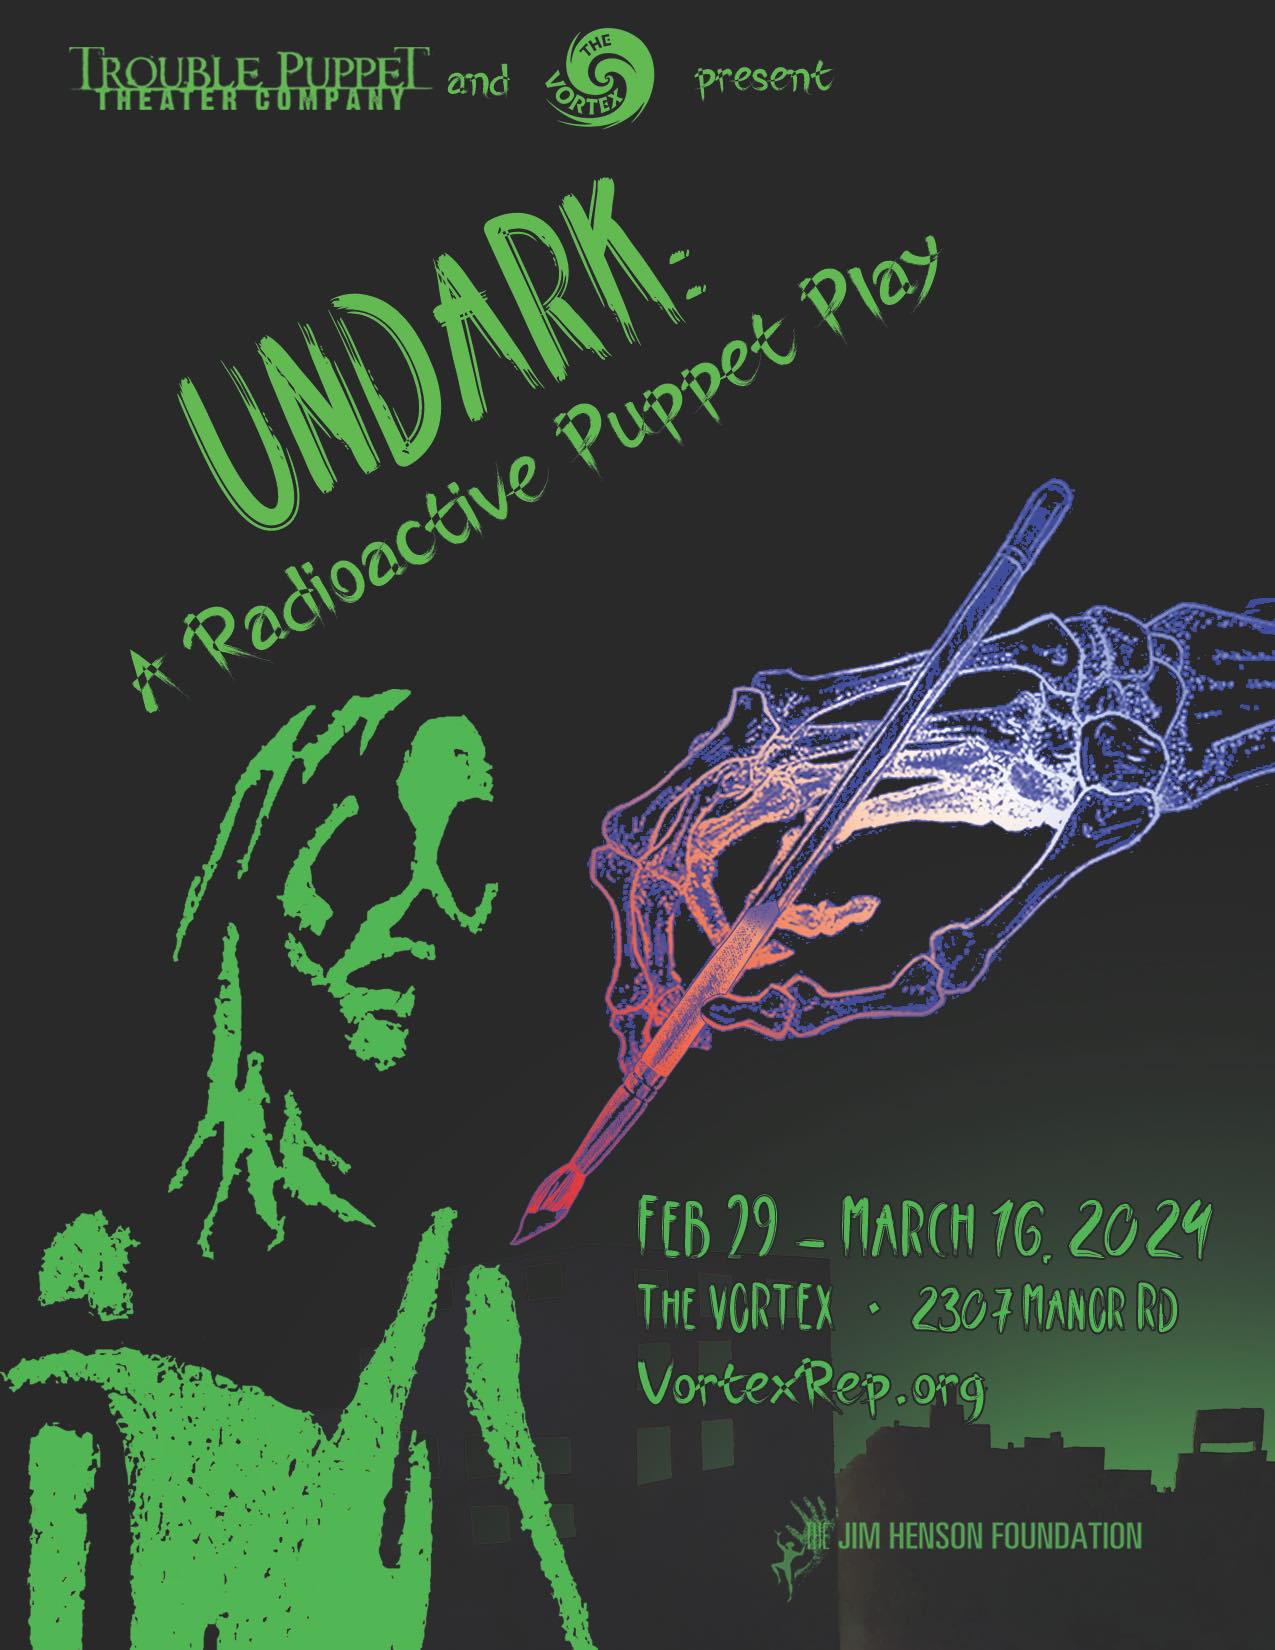 Undark - A Radioactive Puppet Play by Trouble Puppet Theatre Company